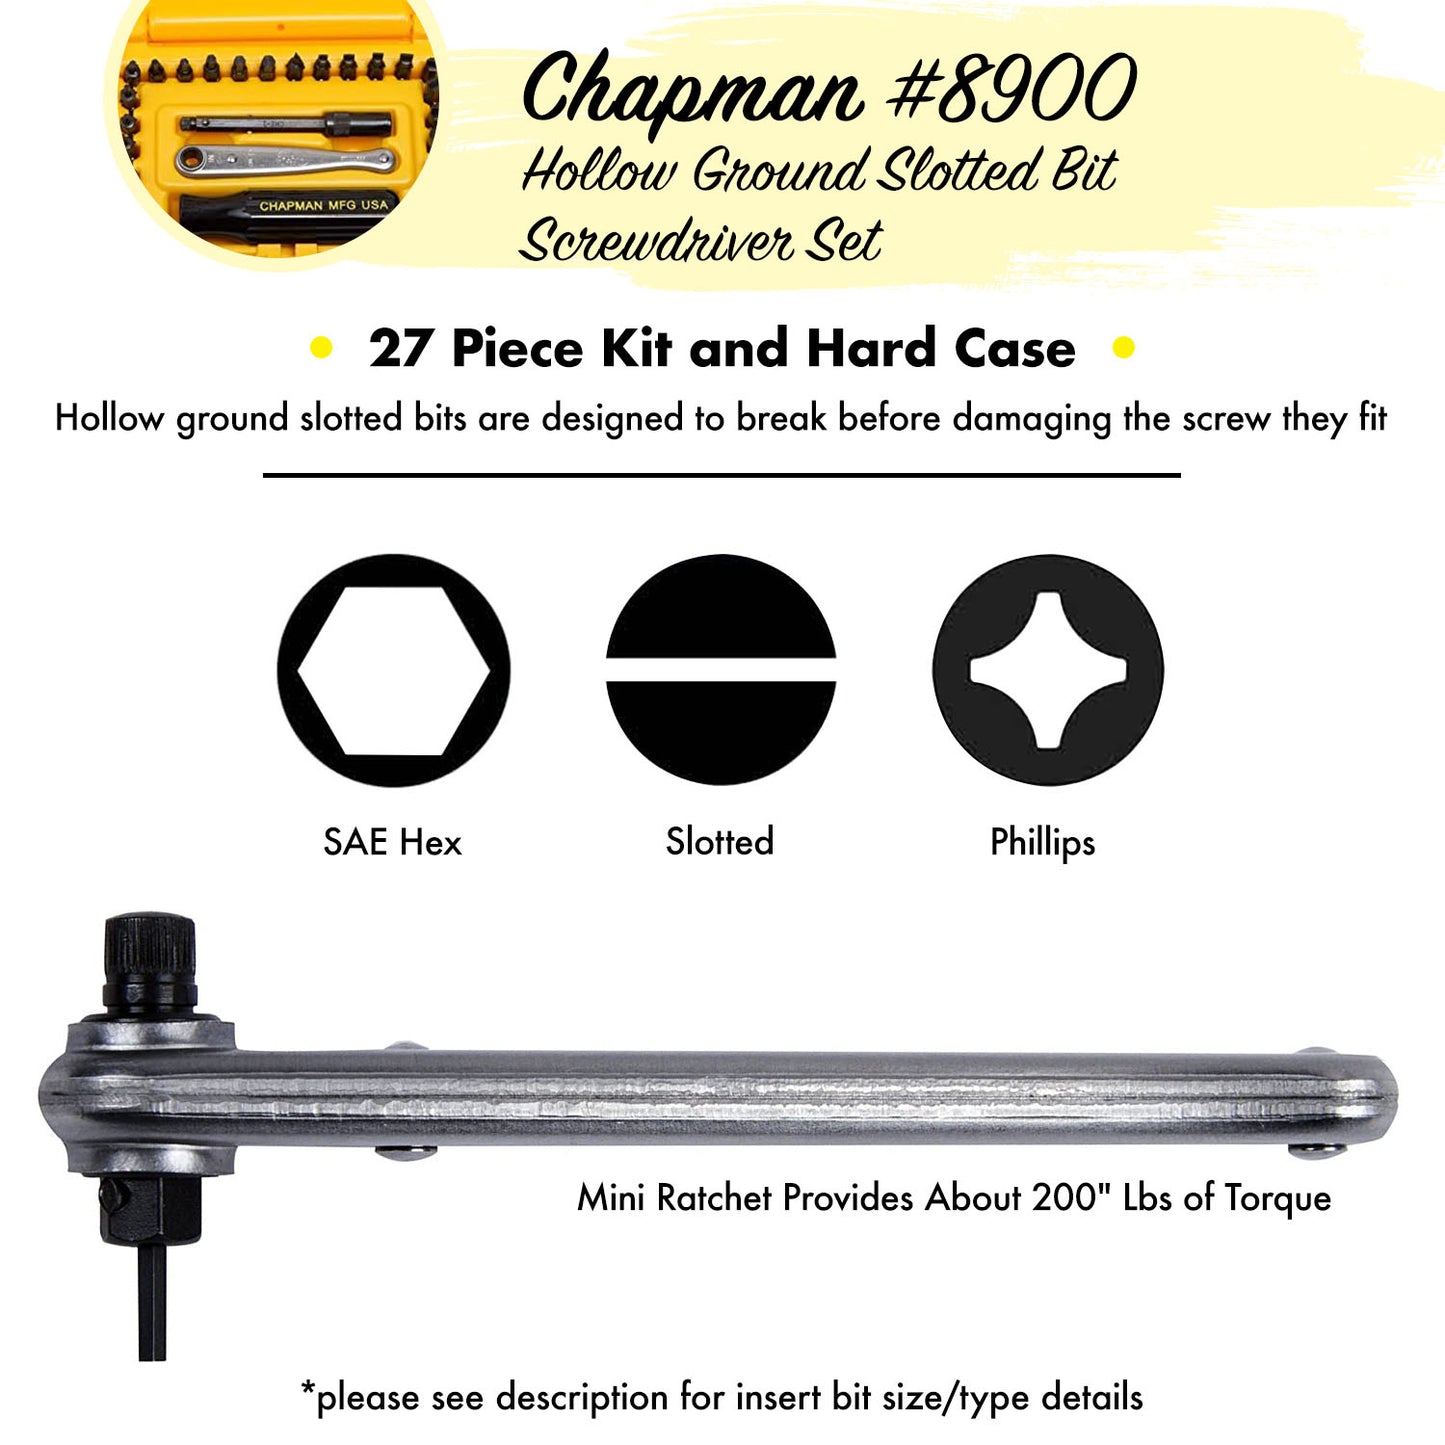 8900 Standard + 12 Slotted Screwdriver Set - 24 bit set with Phillips, Slotted, SAE Hex and 12 slotted bits  | Chapman MFG